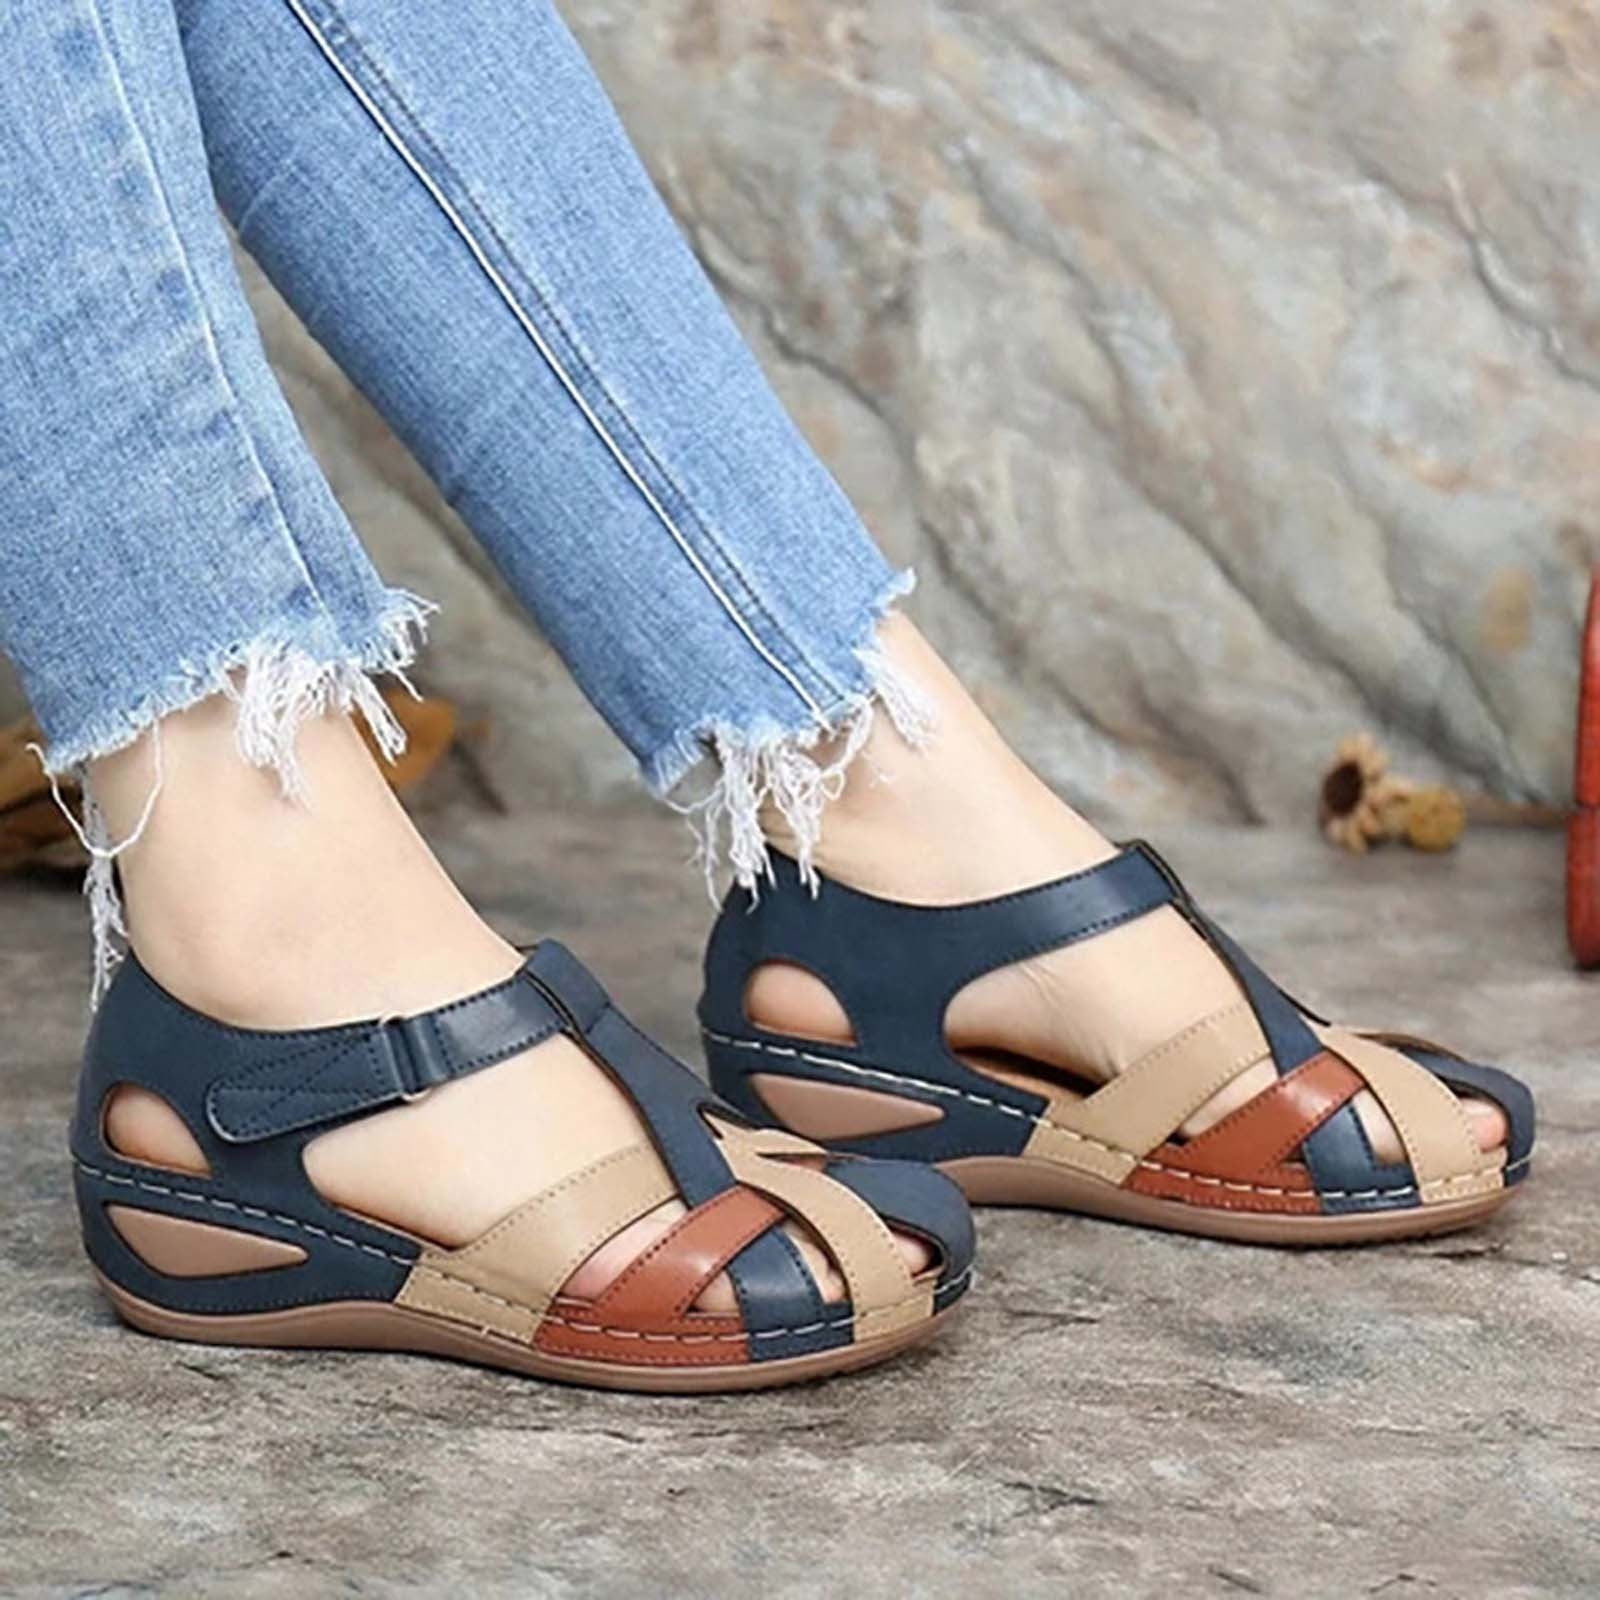 2023 Summer Holiday Shoes Women Wedges Sandals Flat Platform Fashion Ladies  Party Shoes Wedge Heels 5cm A4370 - AliExpress